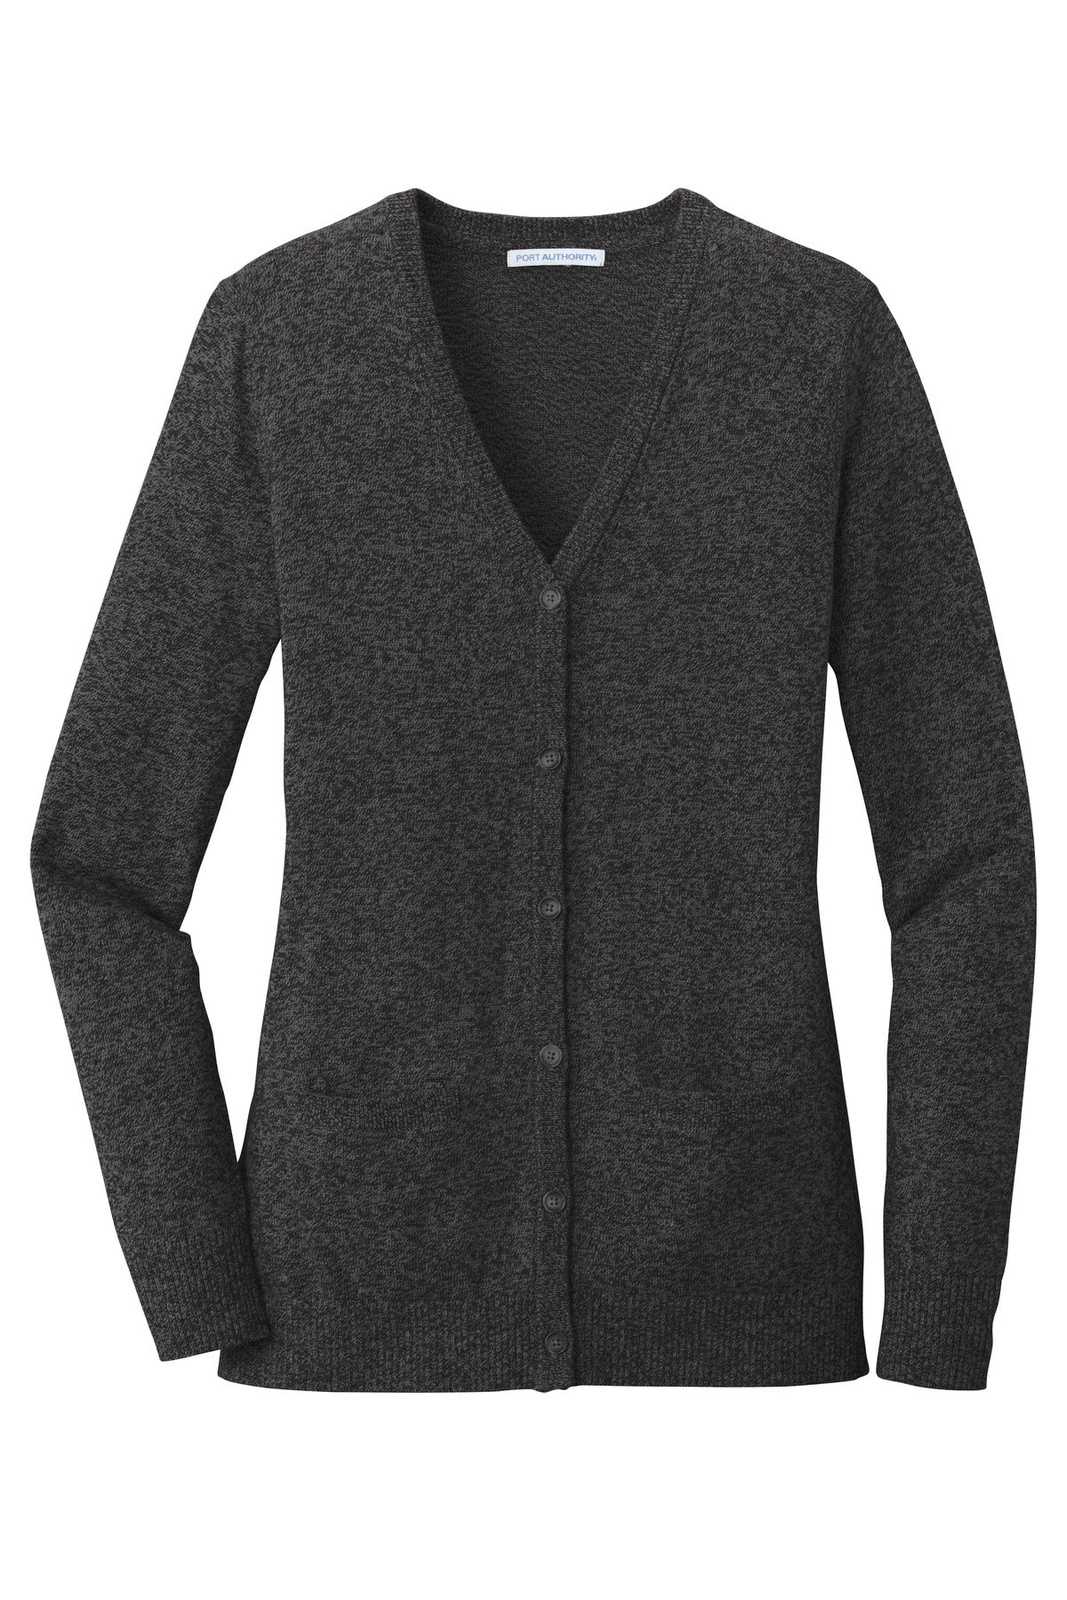 Port Authority LSW415 Ladies Marled Cardigan Sweater - Black Marl - HIT a Double - 5